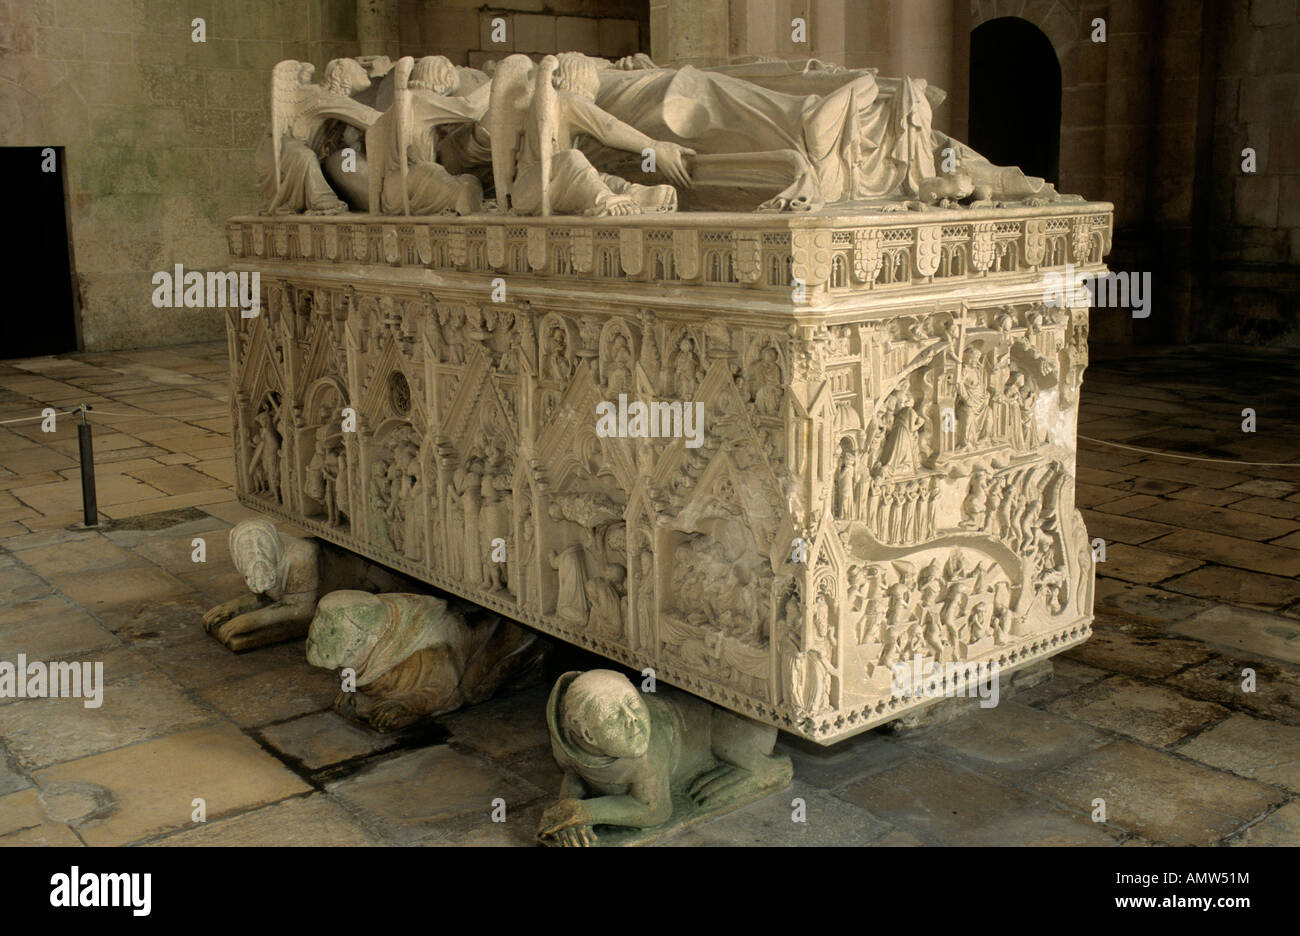 The intricately carved 14th-century tomb of Inês de Castro at Alcobaça monastery in central Portugal Stock Photo